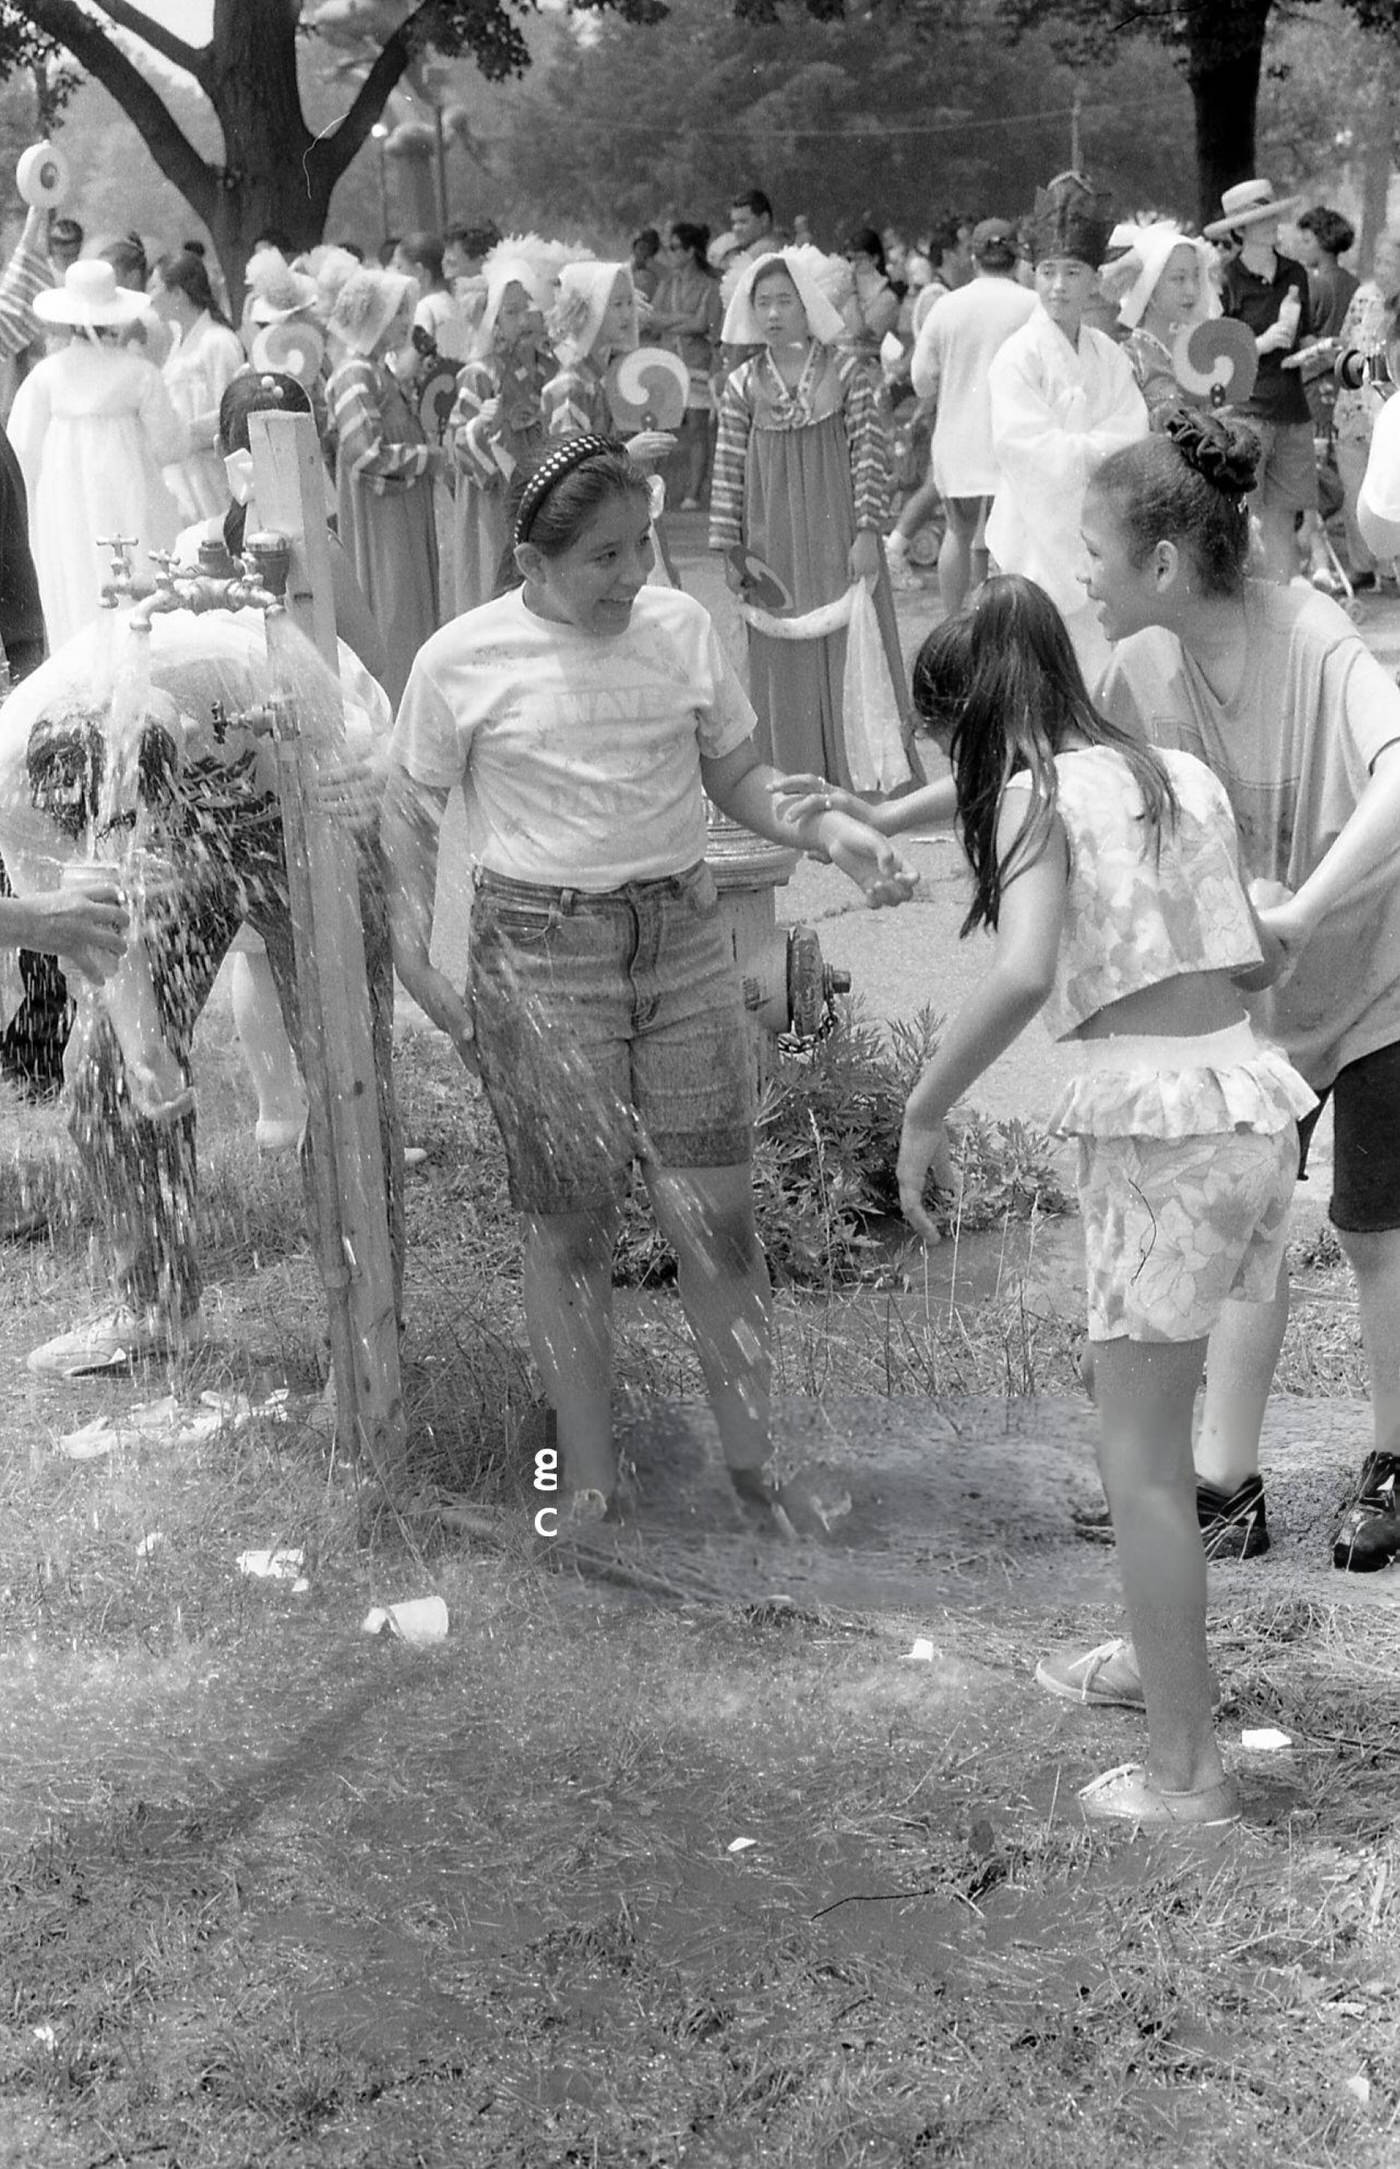 People Cool Off In Flushing Meadows Park In Corona, Queens, 1994.